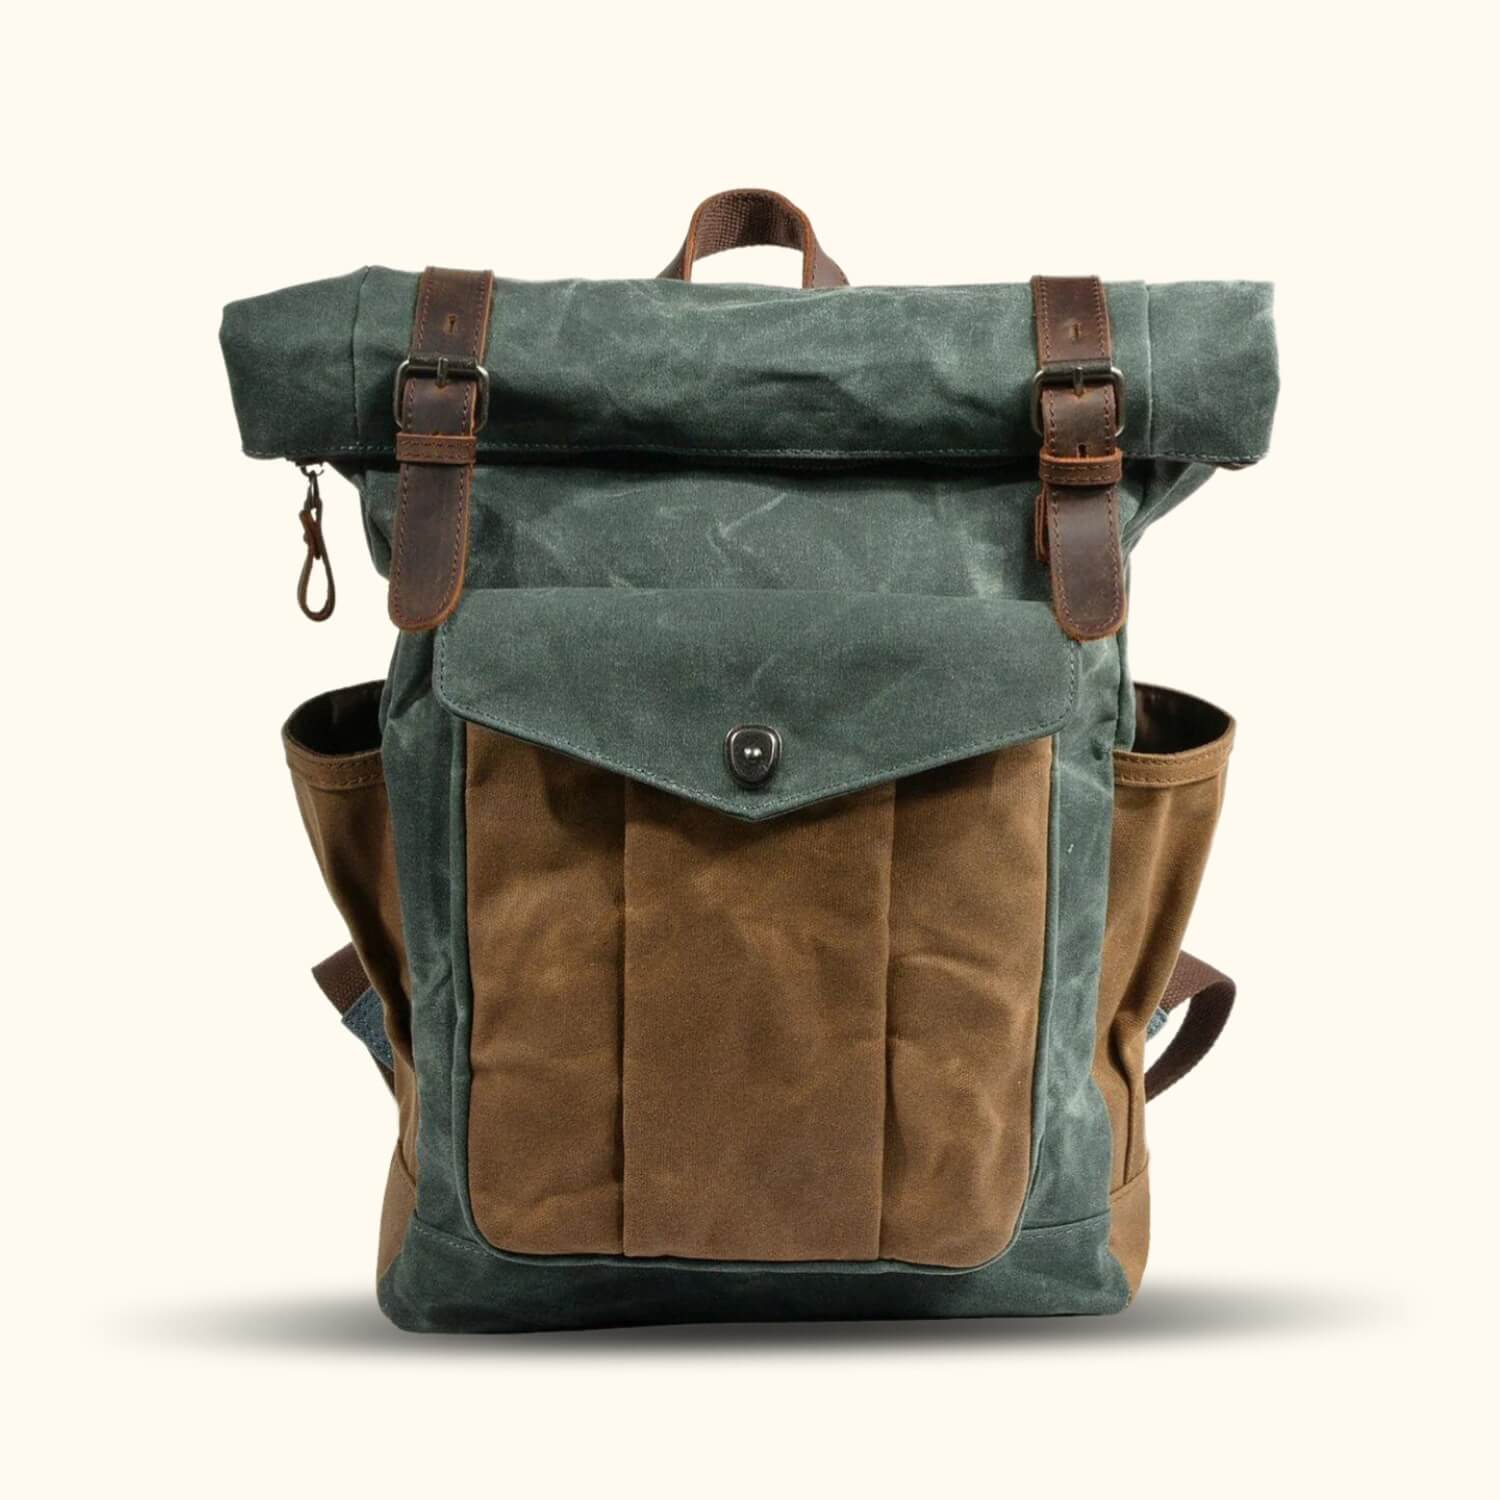 Trail Mater Roll Top Bag